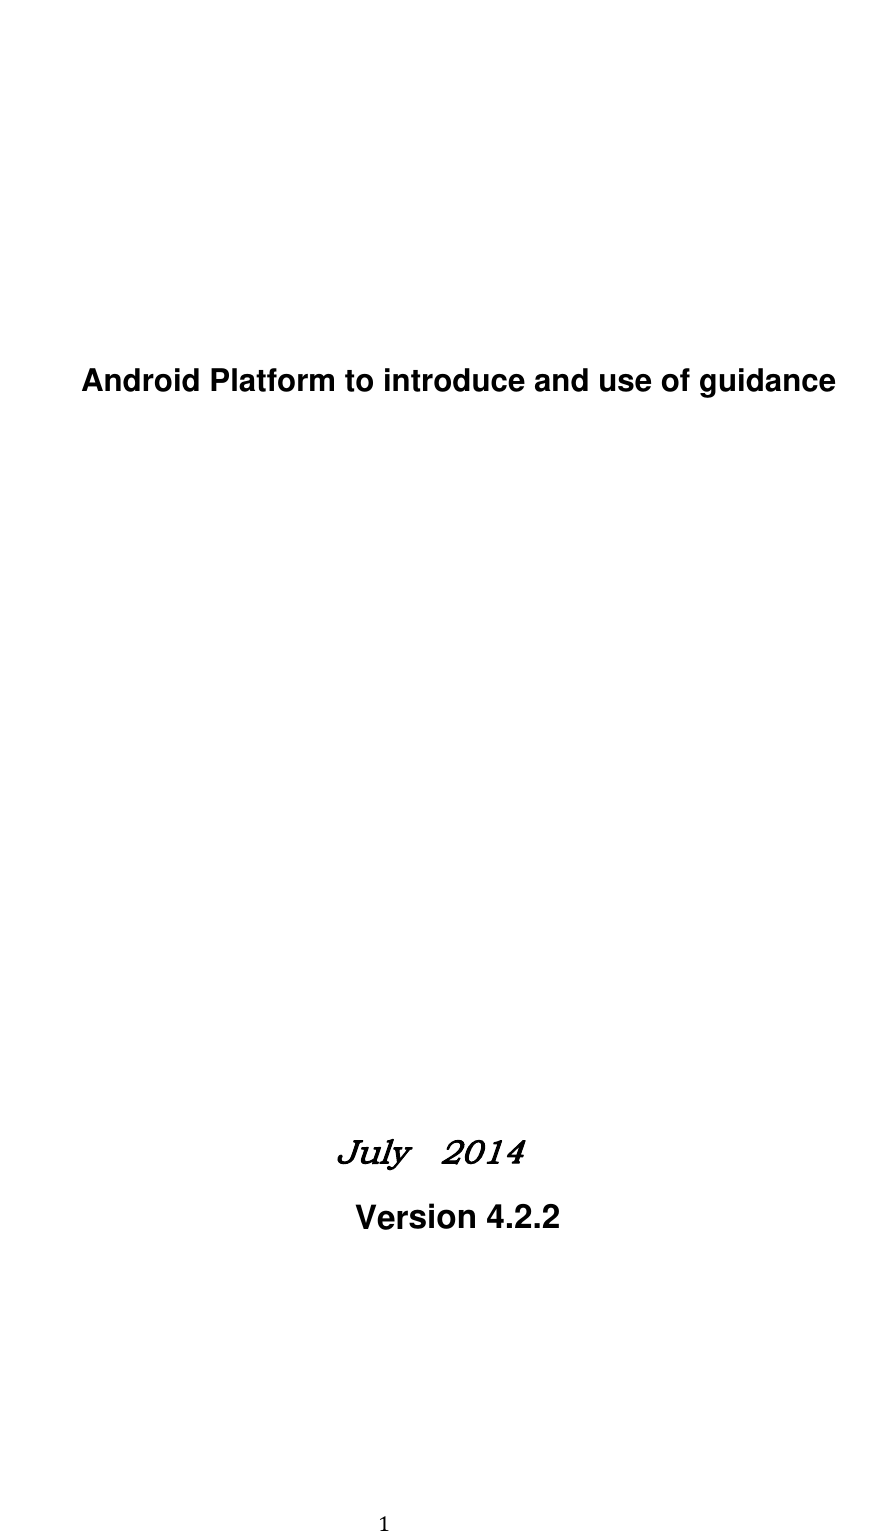                                          1          Android Platform to introduce and use of guidance                                      July    2014                      Version 4.2.2   